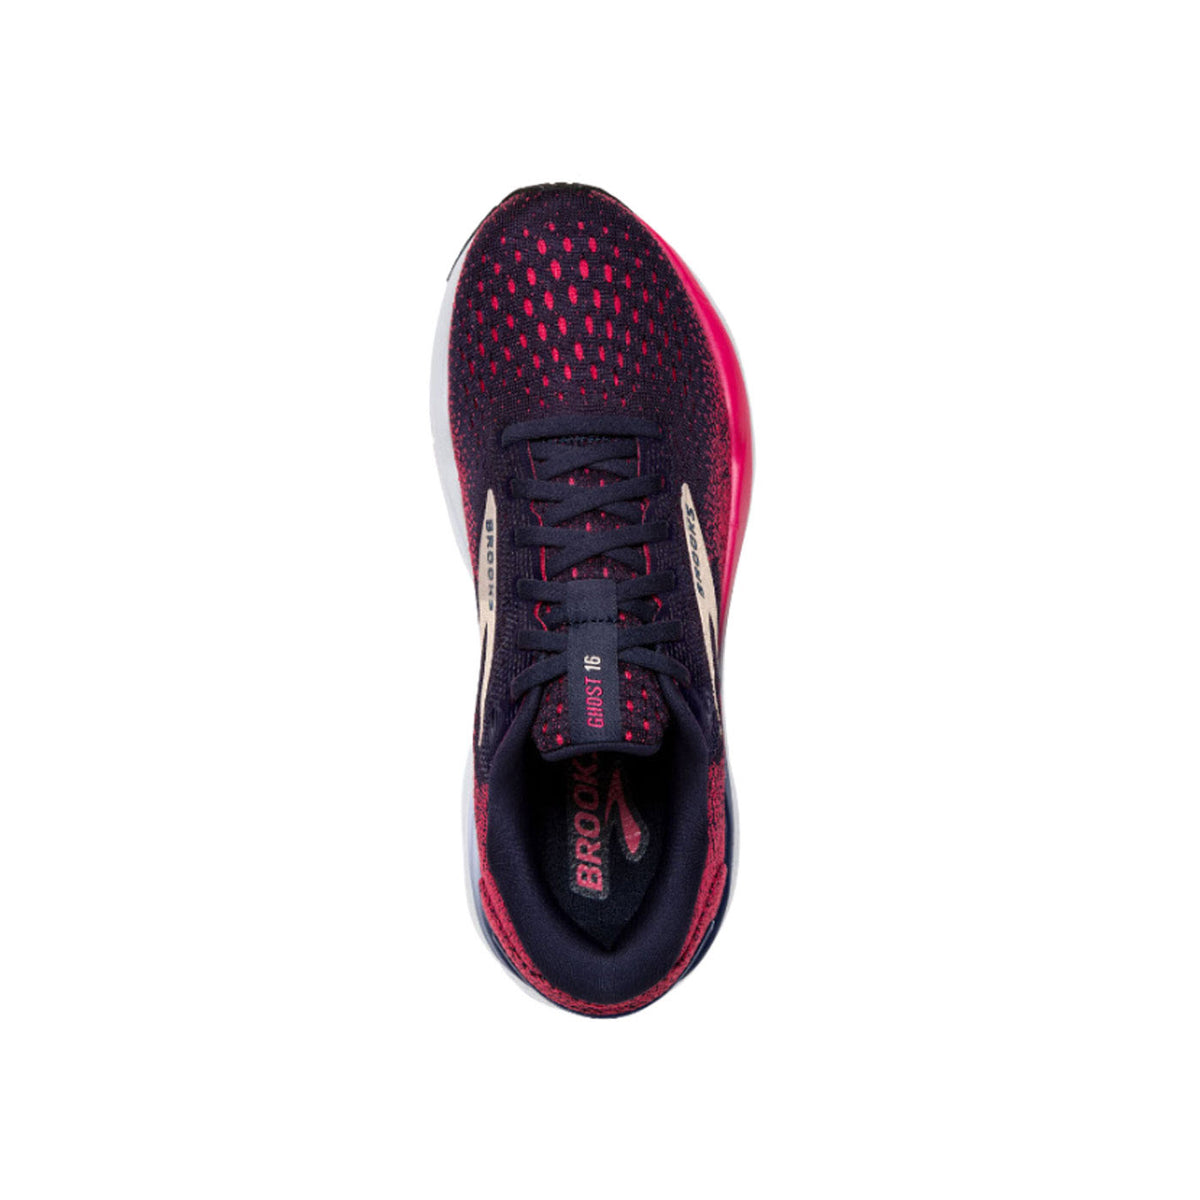 Top view of a single athletic shoe with a dark mesh upper, dark laces, and red accents. The insole features the brand name &quot;Brooks.&quot; These Brooks running shoes are the BROOKS GHOST 16 PEACOAT/RASPBERRY/APRICOT - WOMENS model, known for their improved cushioning.